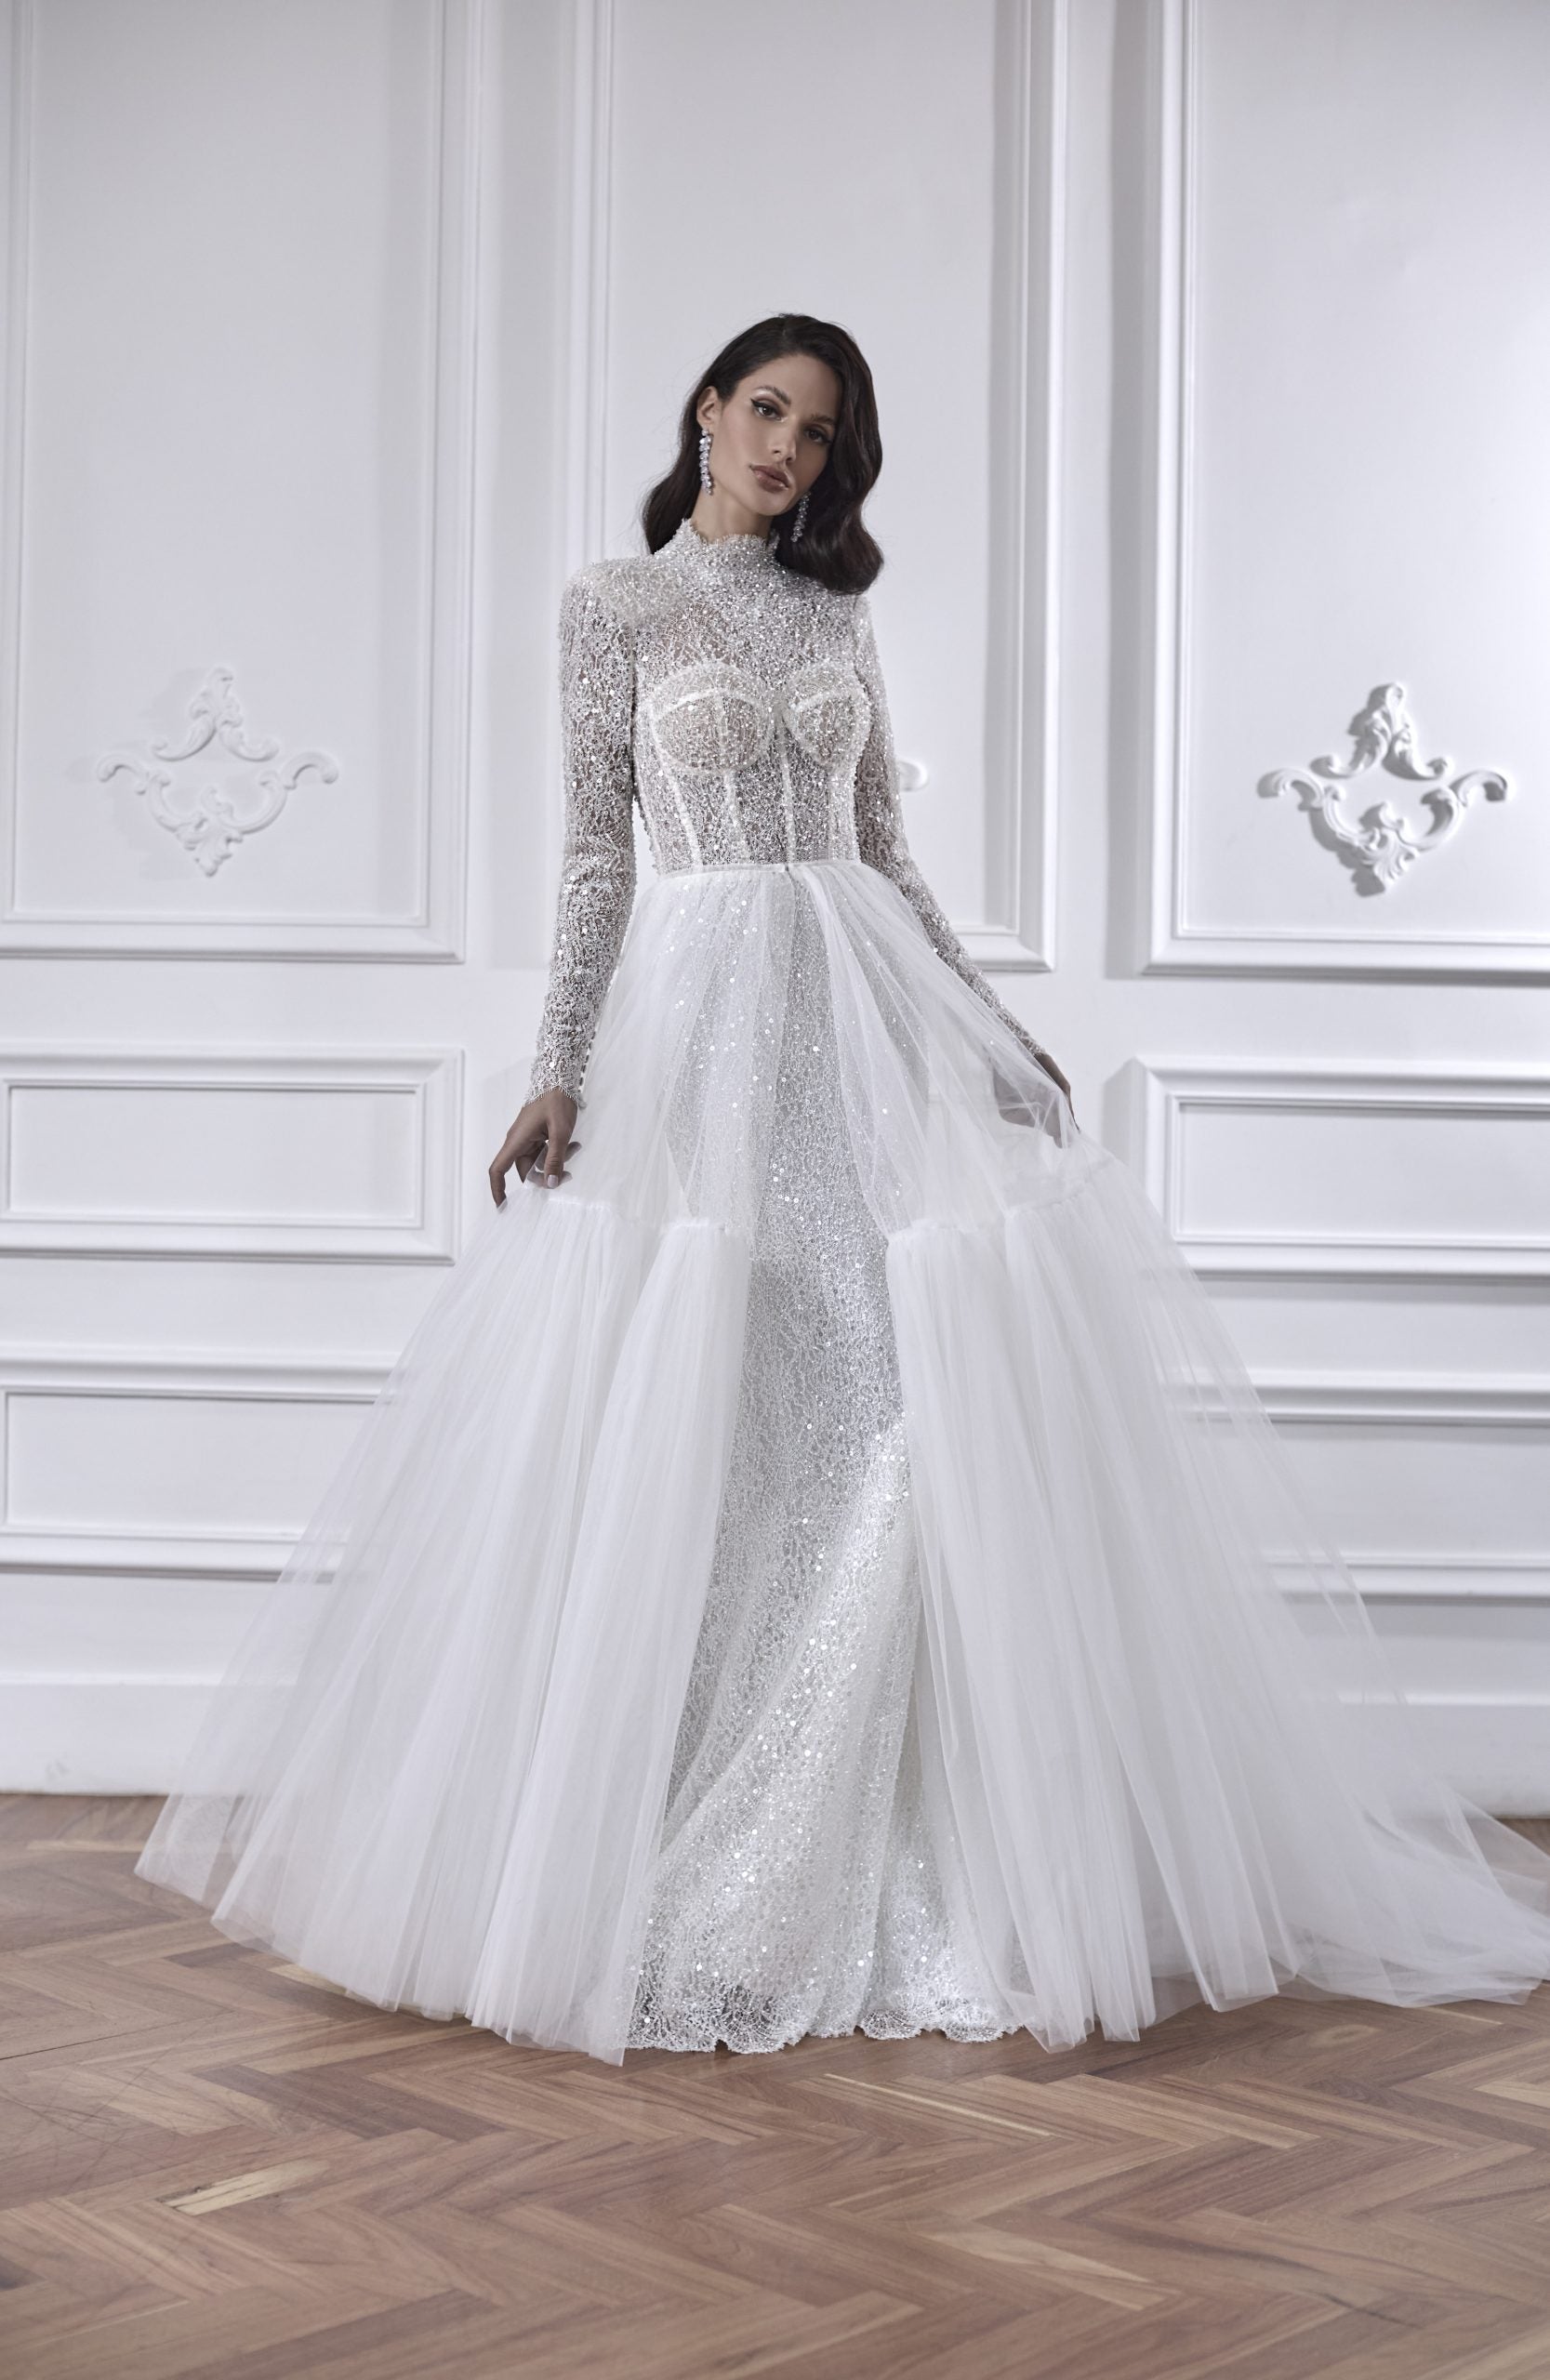 Long Sleeve Fit And Flare Wedding Dress With Detachable Overskirt by Maison Signore